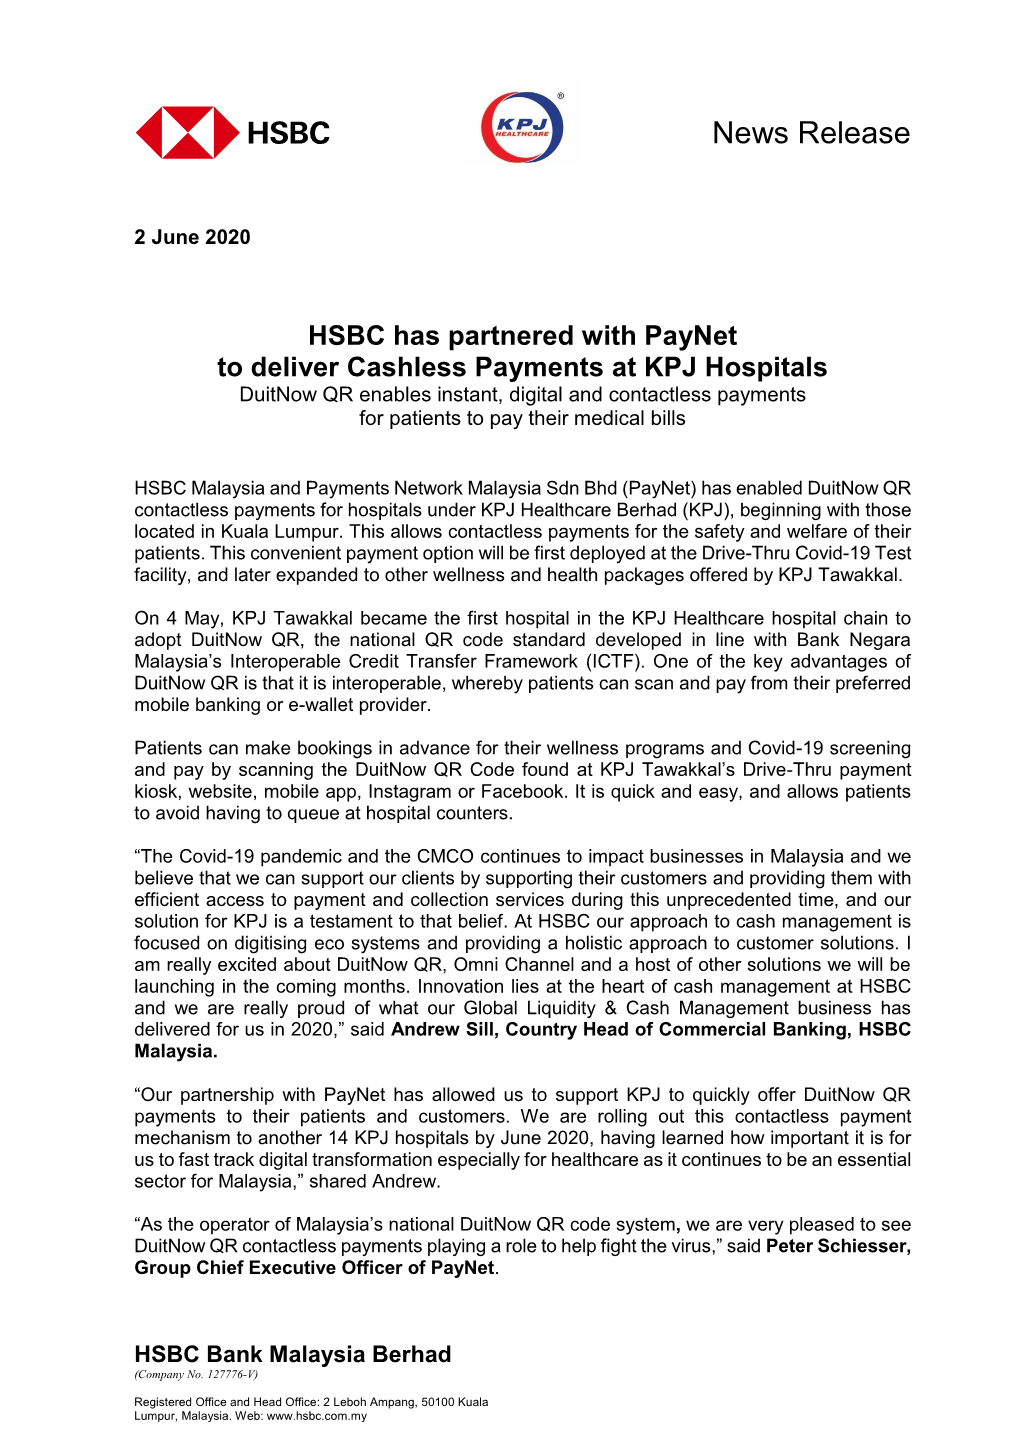 HSBC Has Partnered with Paynet to Deliver Cashless Payments at KPJ